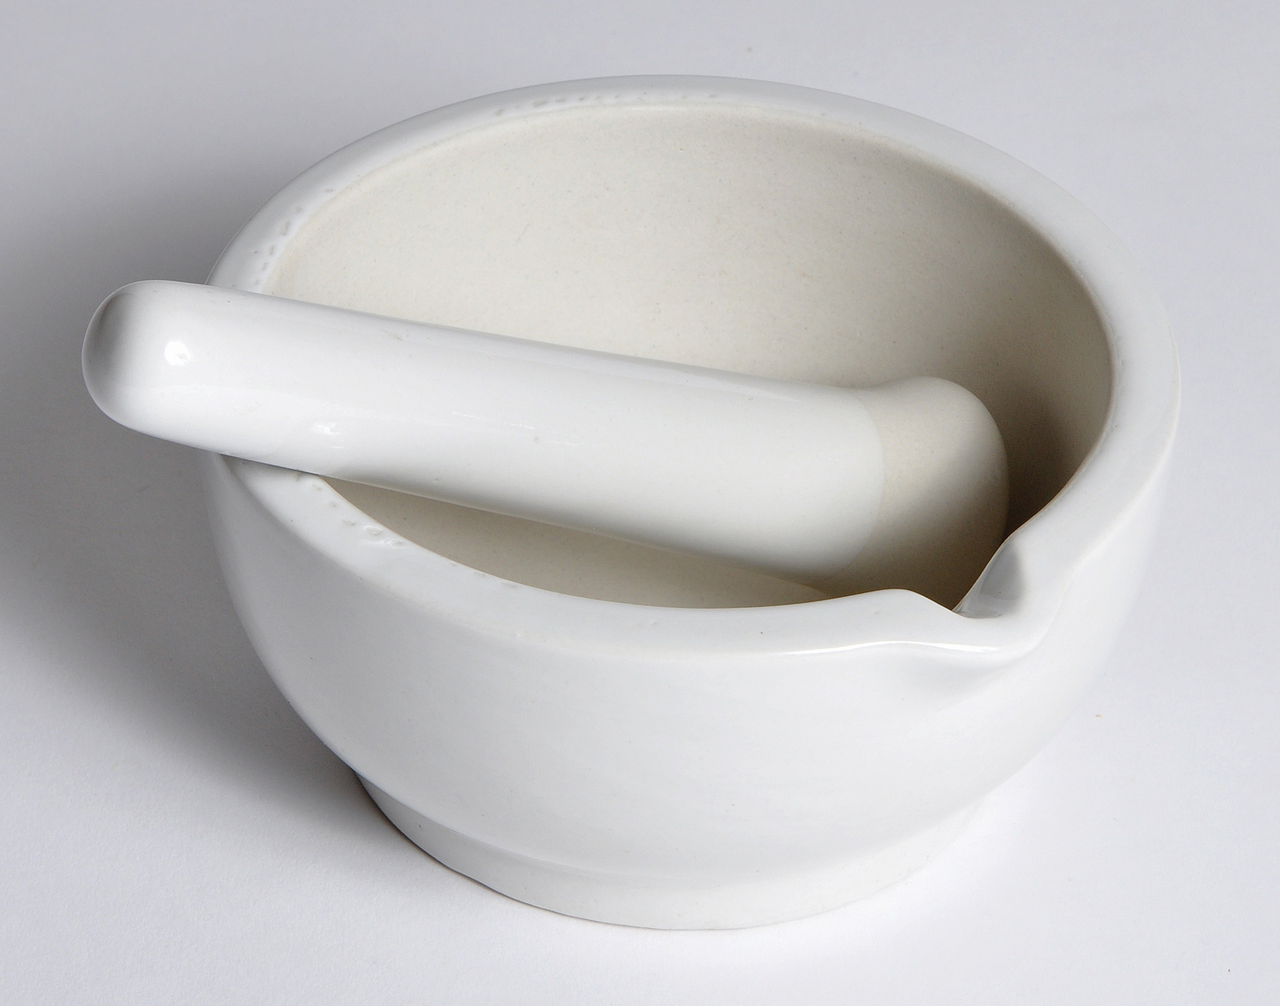 5 Best Mortar and Pestles 2023 Reviewed